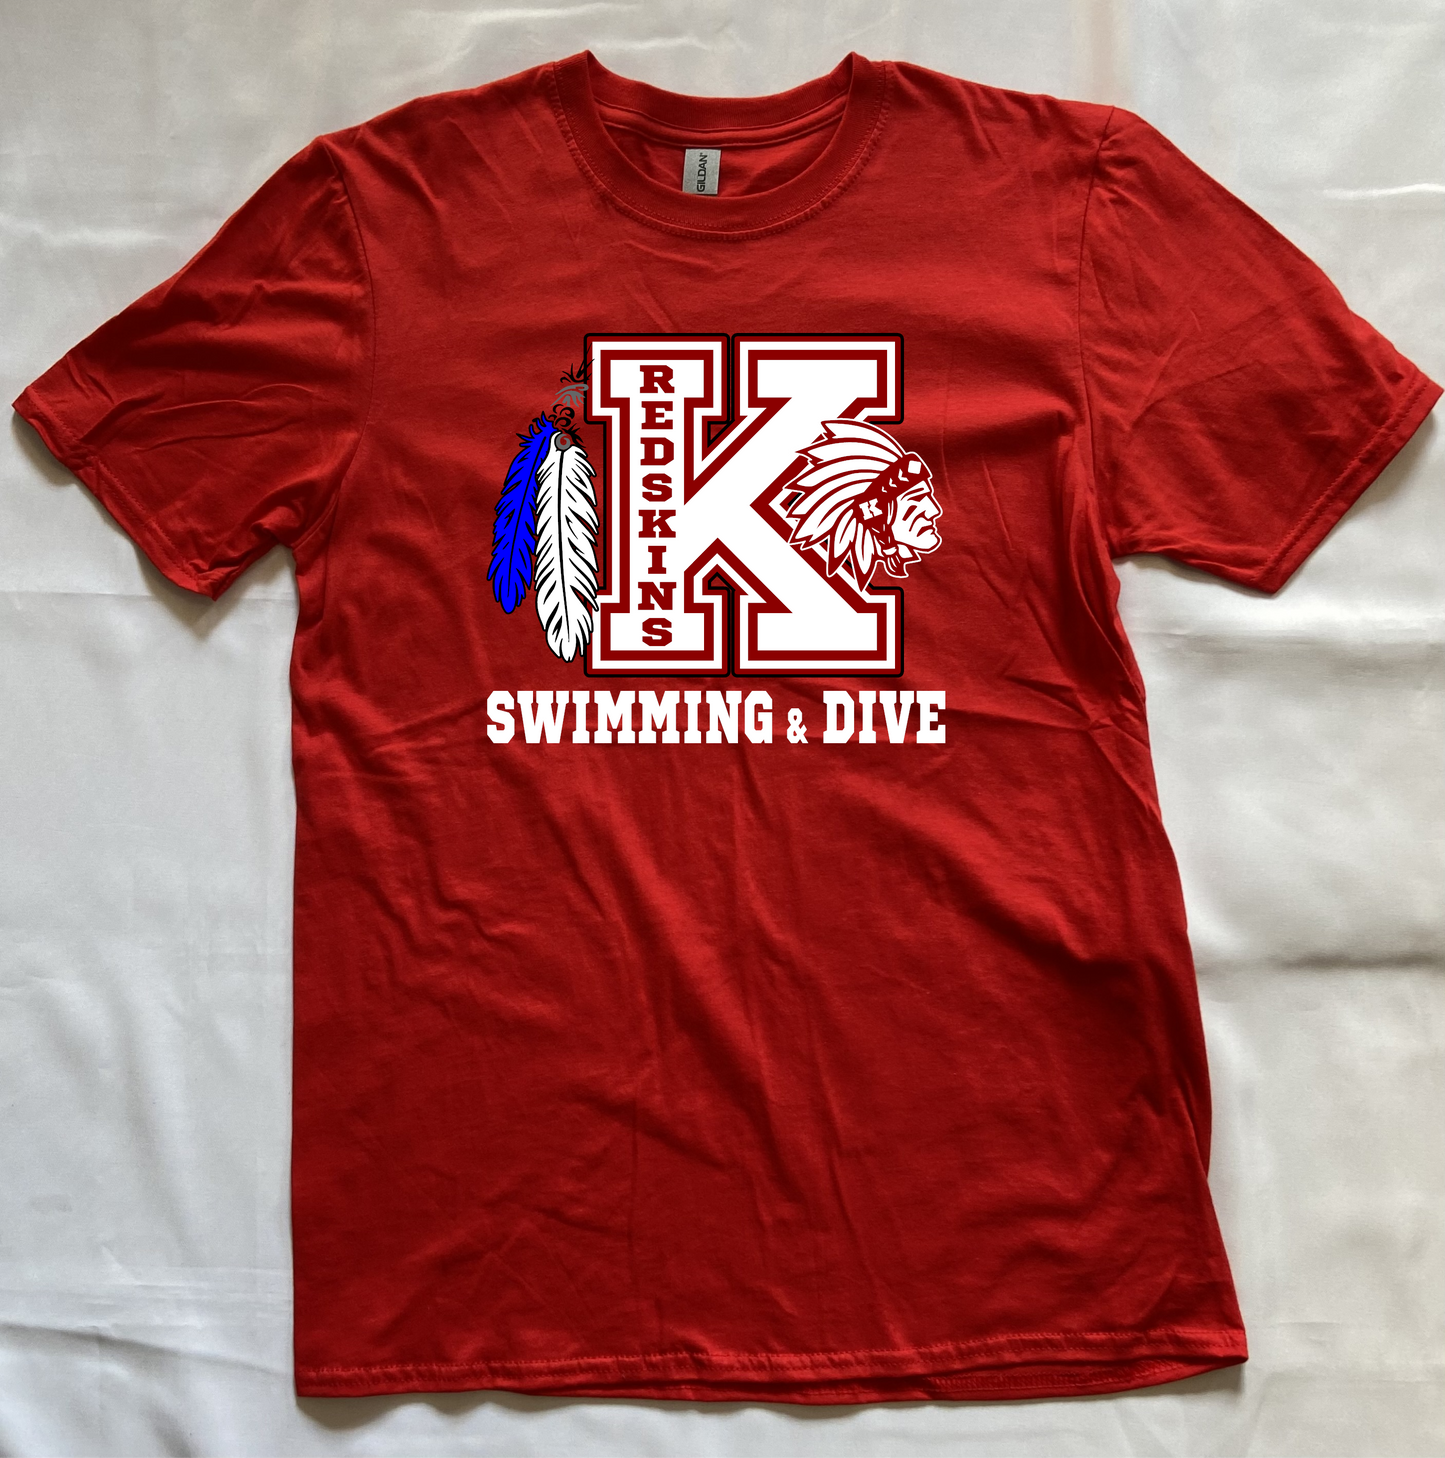 Knox Redskins Swimming & Dive T-shirt - Red - Adult and Youth Sizes